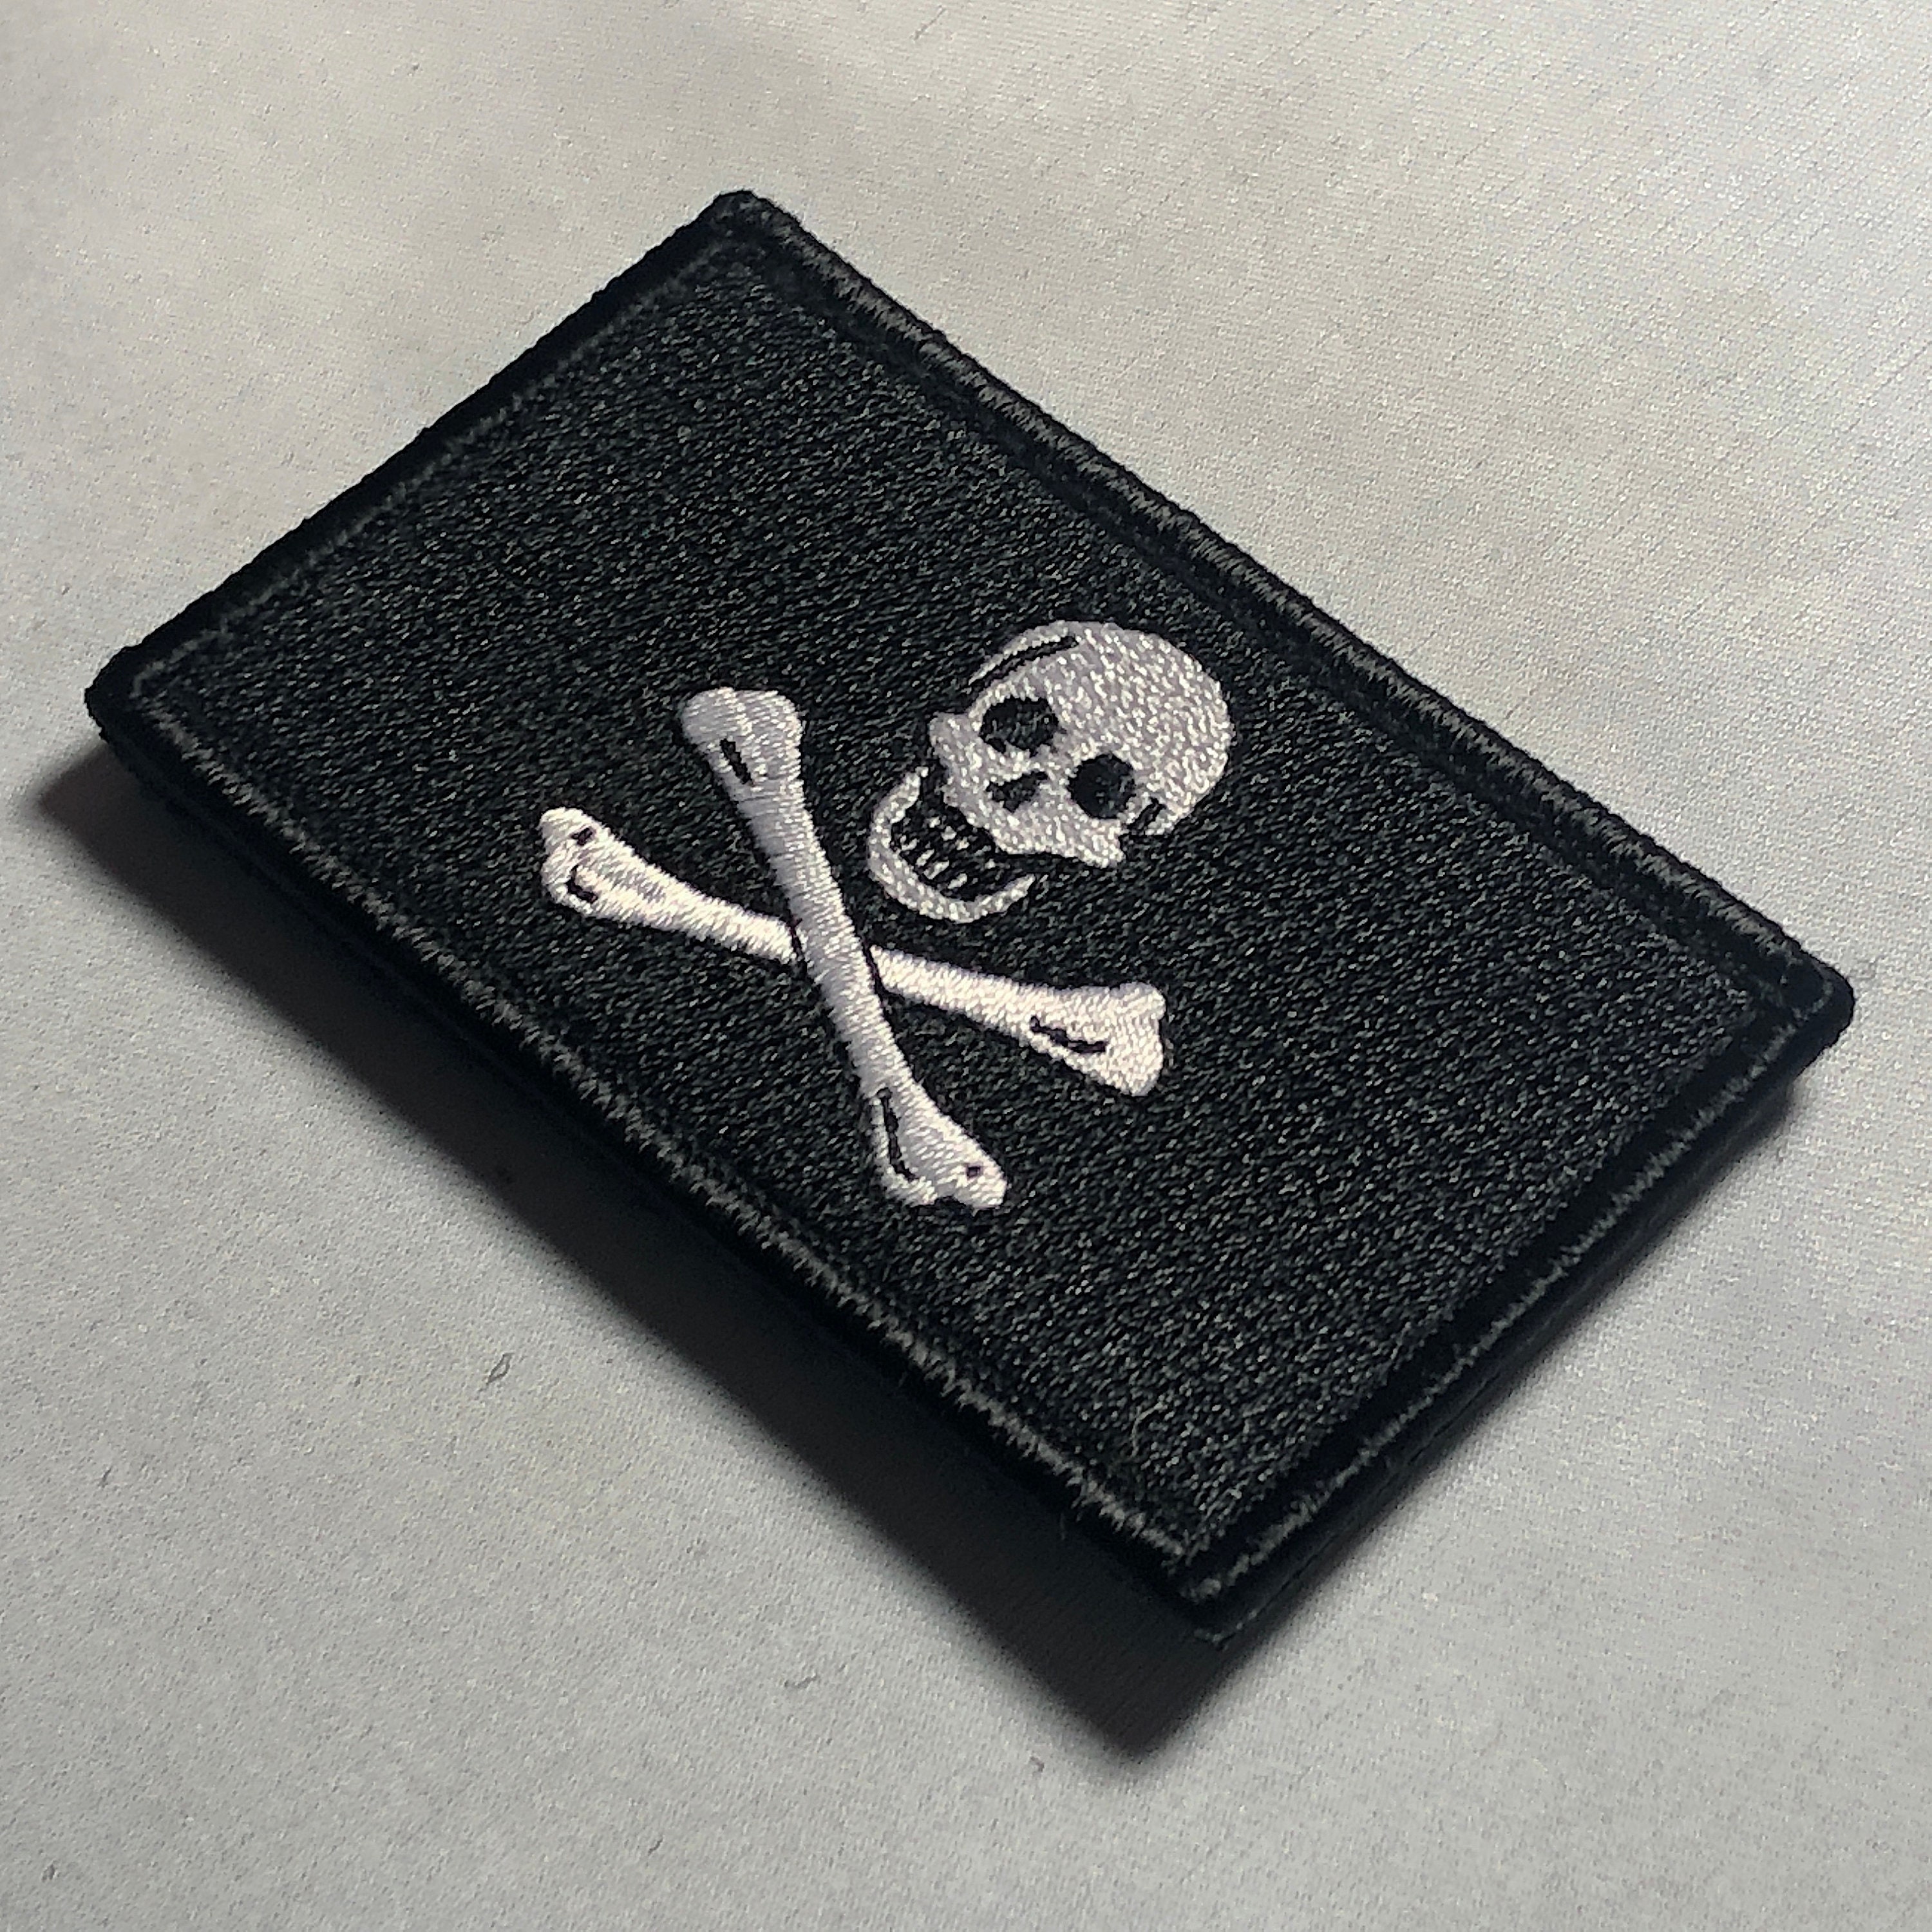 Boutique DIY┅ Hot Sale Pirate Flag Embroidered Hook Loop Patches Tactical  BADGE PATCH Skull Clothing Cloth Patch Stickers